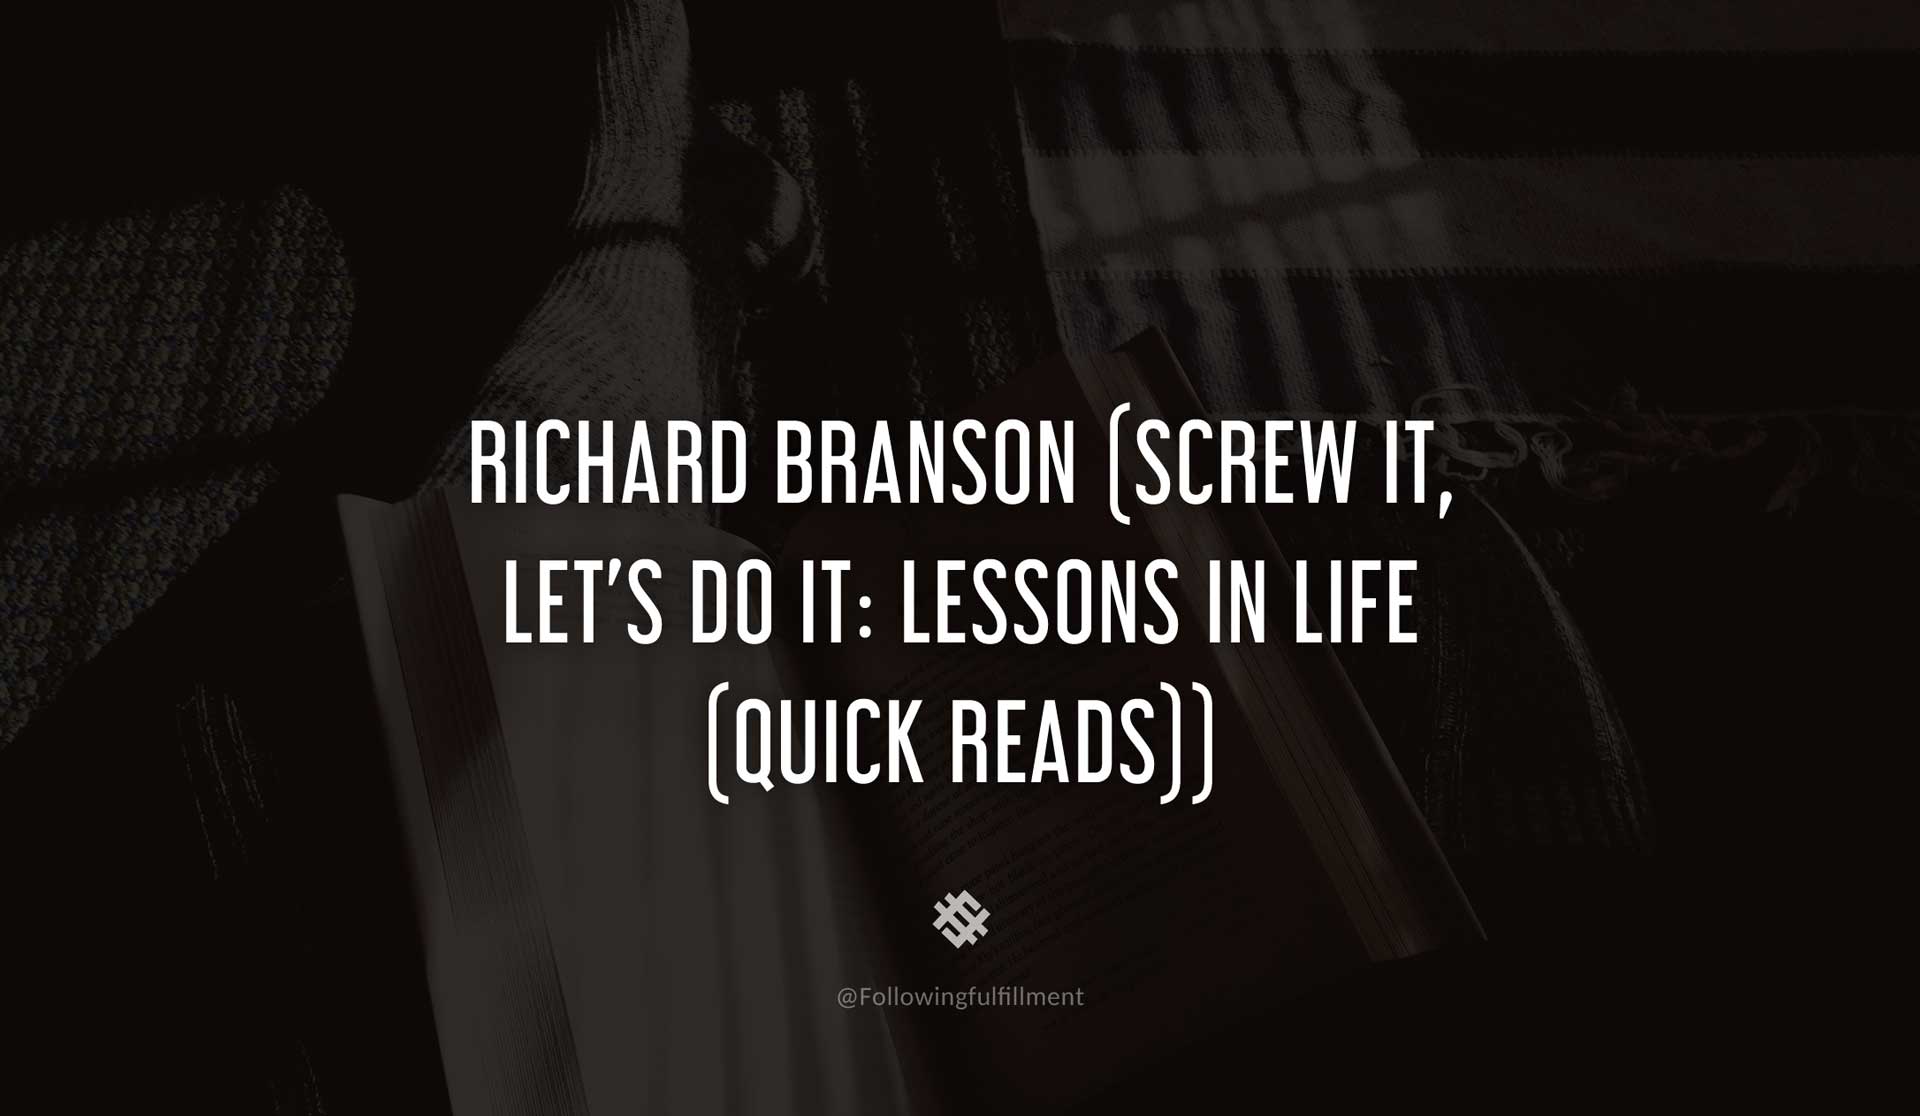 Richard-Branson-(Screw-It,-Let's-Do-It--Lessons-In-Life-(Quick-Reads))-RICHARD-BRANSON-Quote.jpg